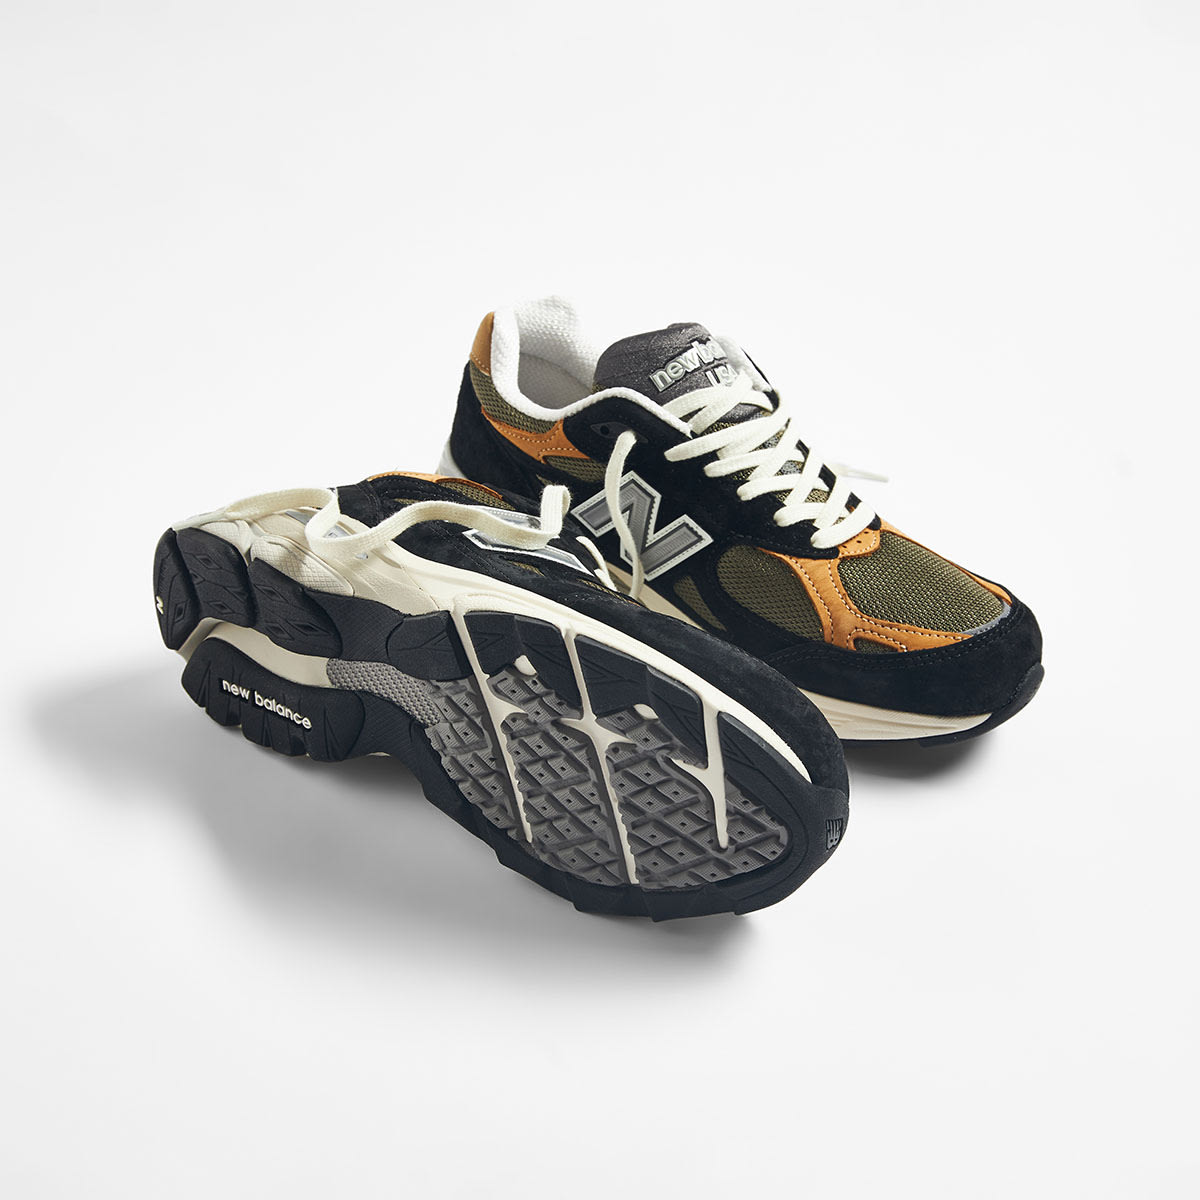 New Balance M990BB3 - Made in USA (Black) | END. Launches